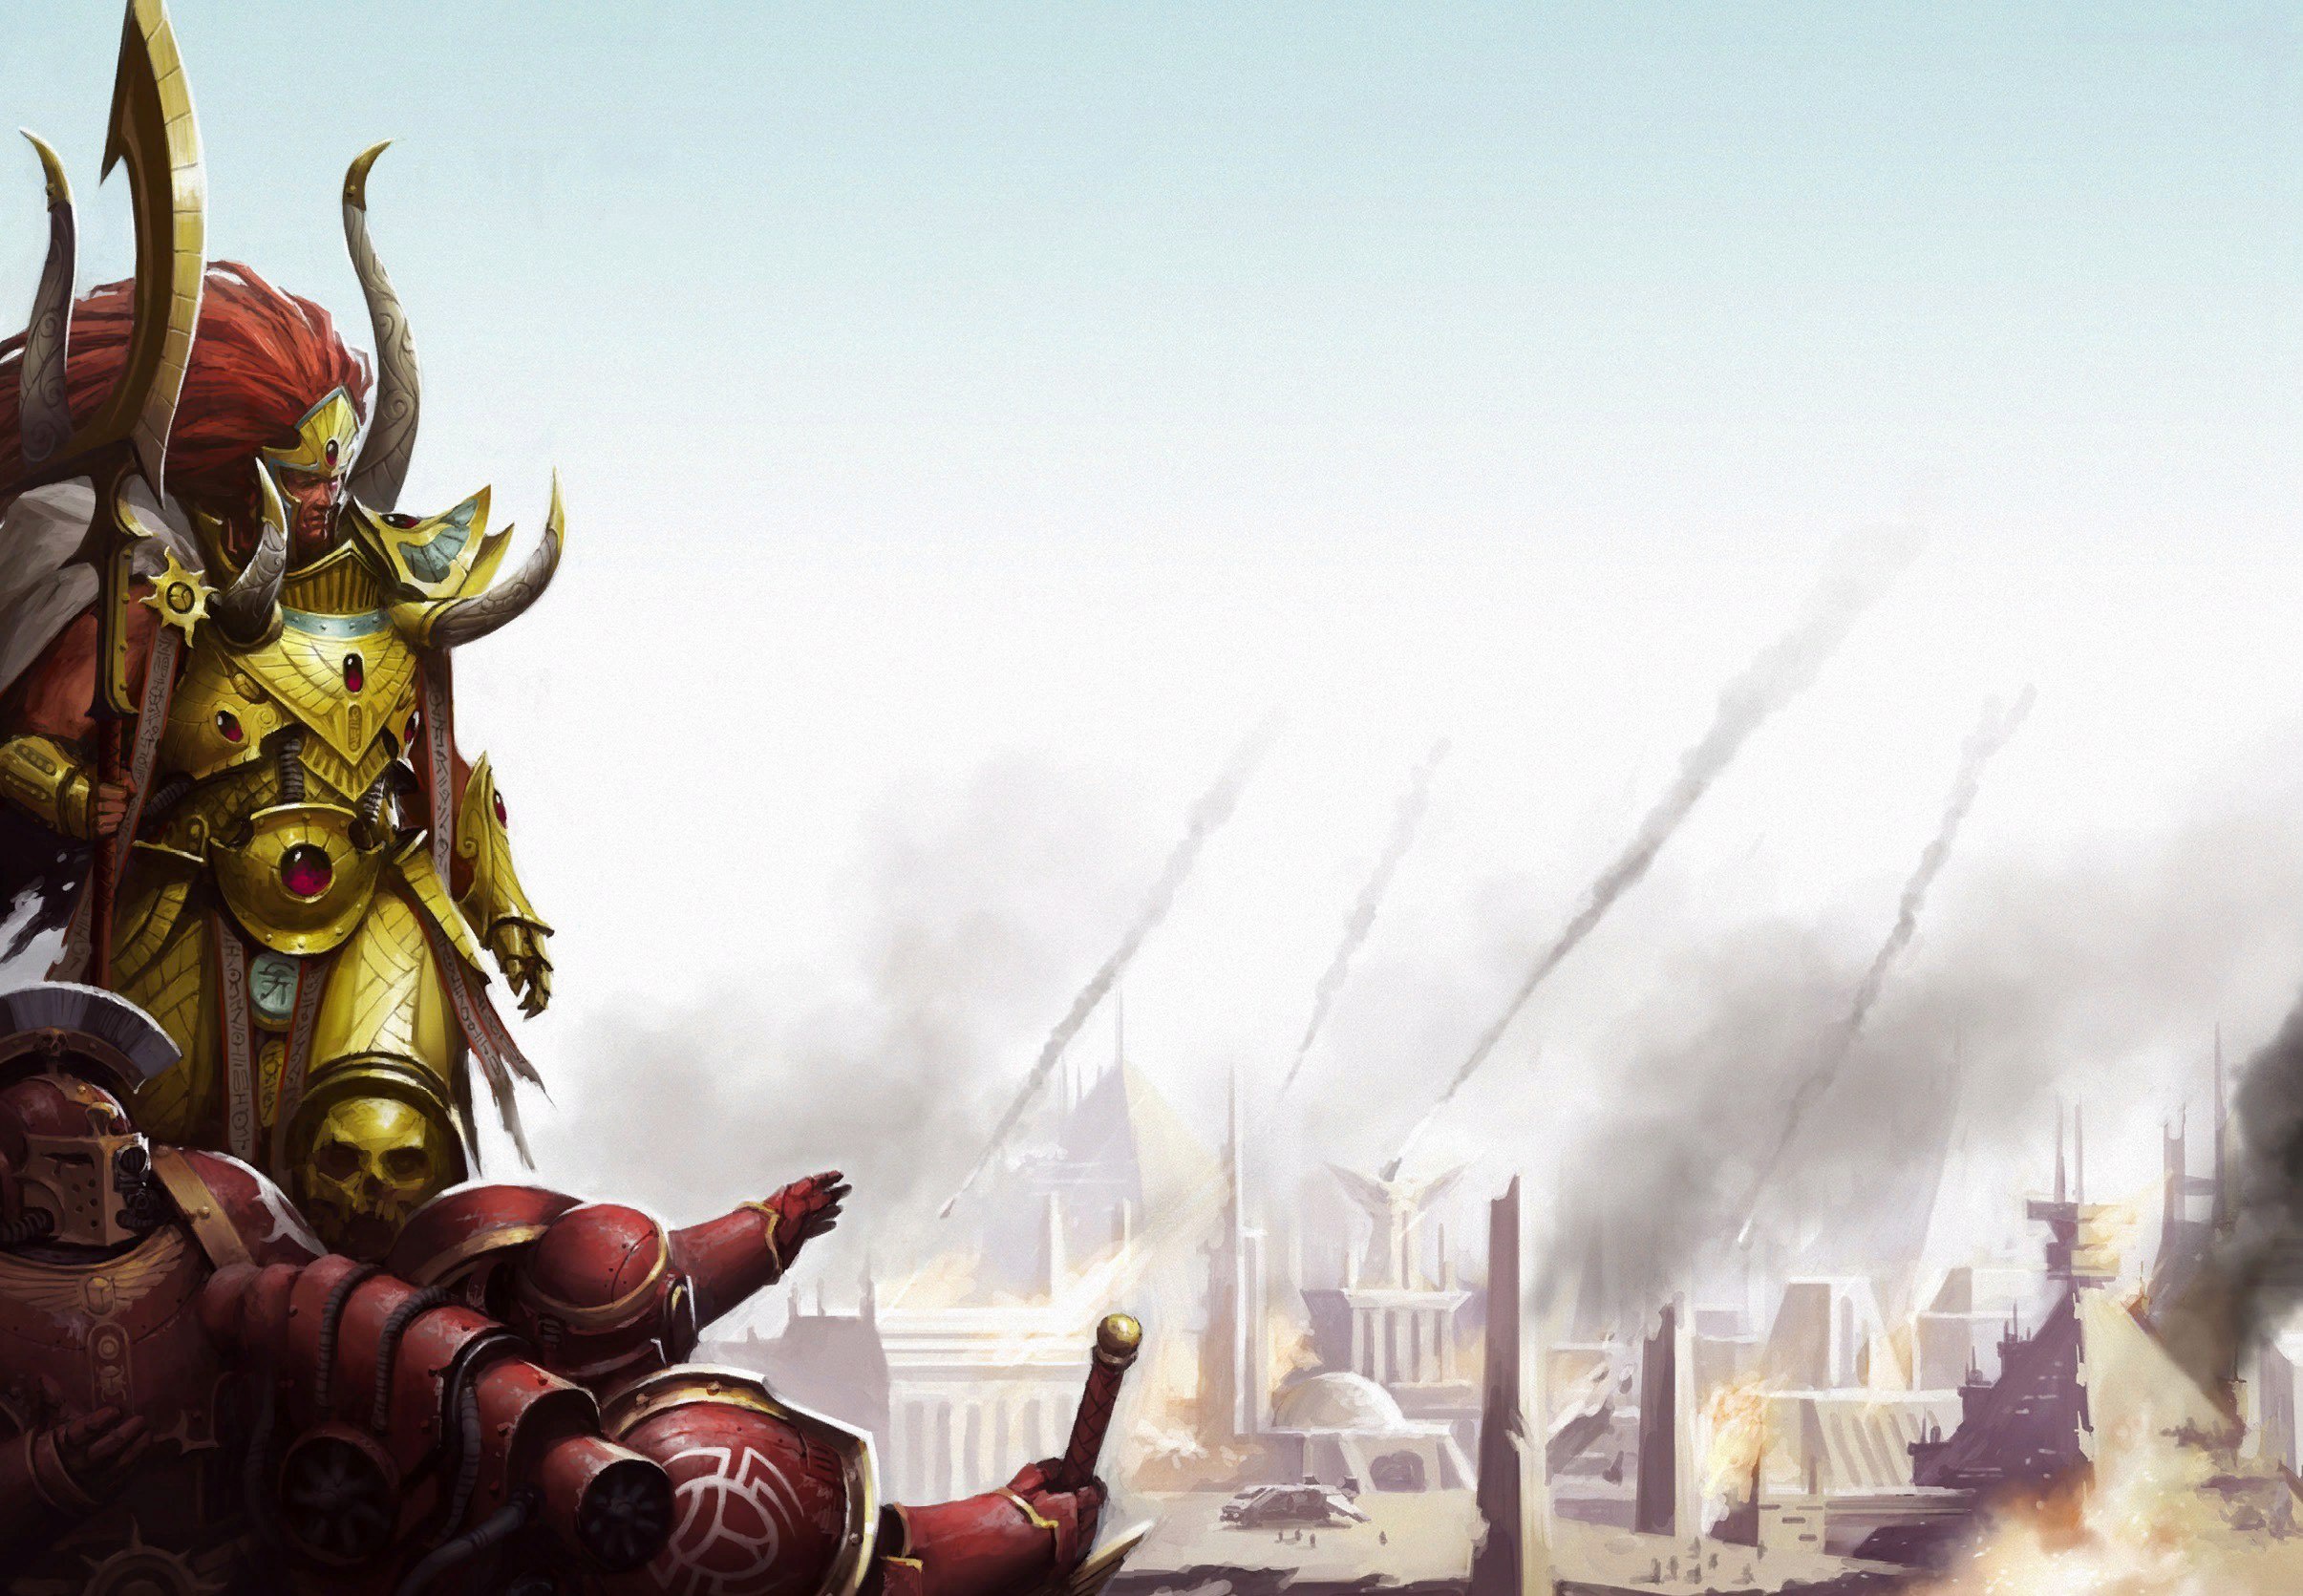 General 2411x1671 Warhammer 30,000 Warhammer 40,000 Warhammer space marines psyker magic science fiction technology Thousand Sons Prospero fire smoke city red gold war fighting power armor Adeptus Astartes battle Magnus-the-Red armor video games video game characters